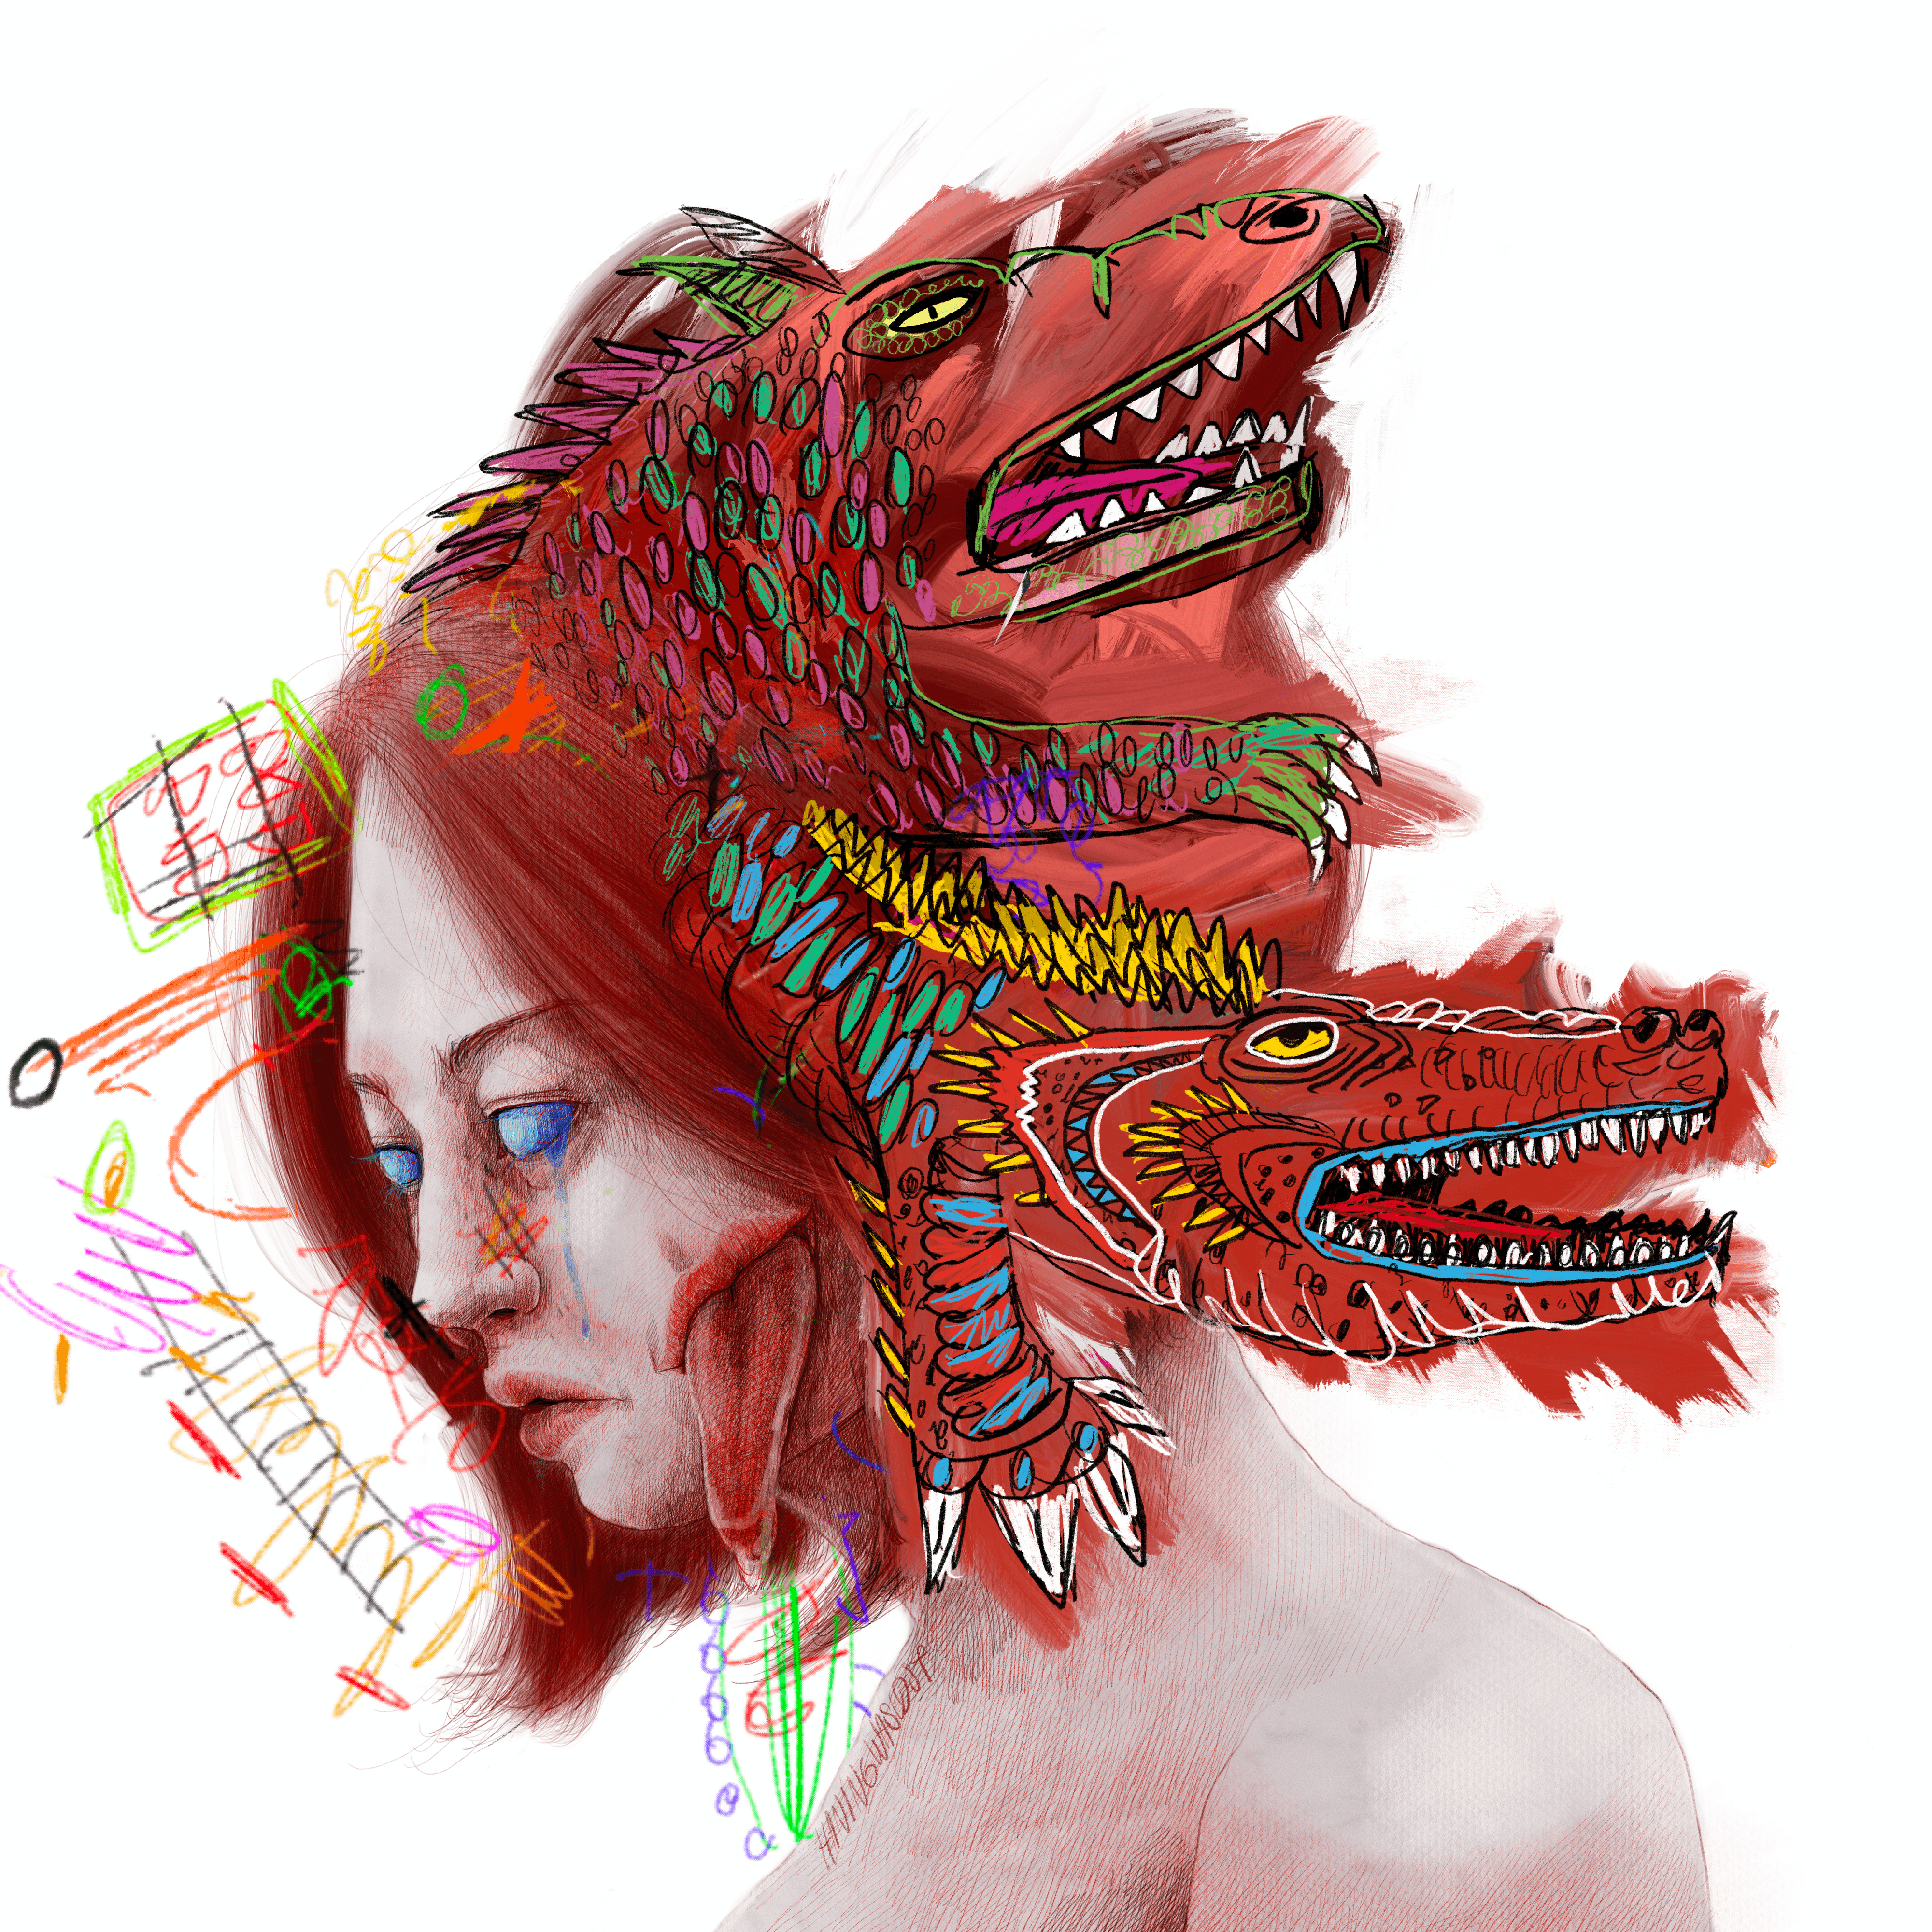 #59 Red Dragons - collab with @haningwaslost